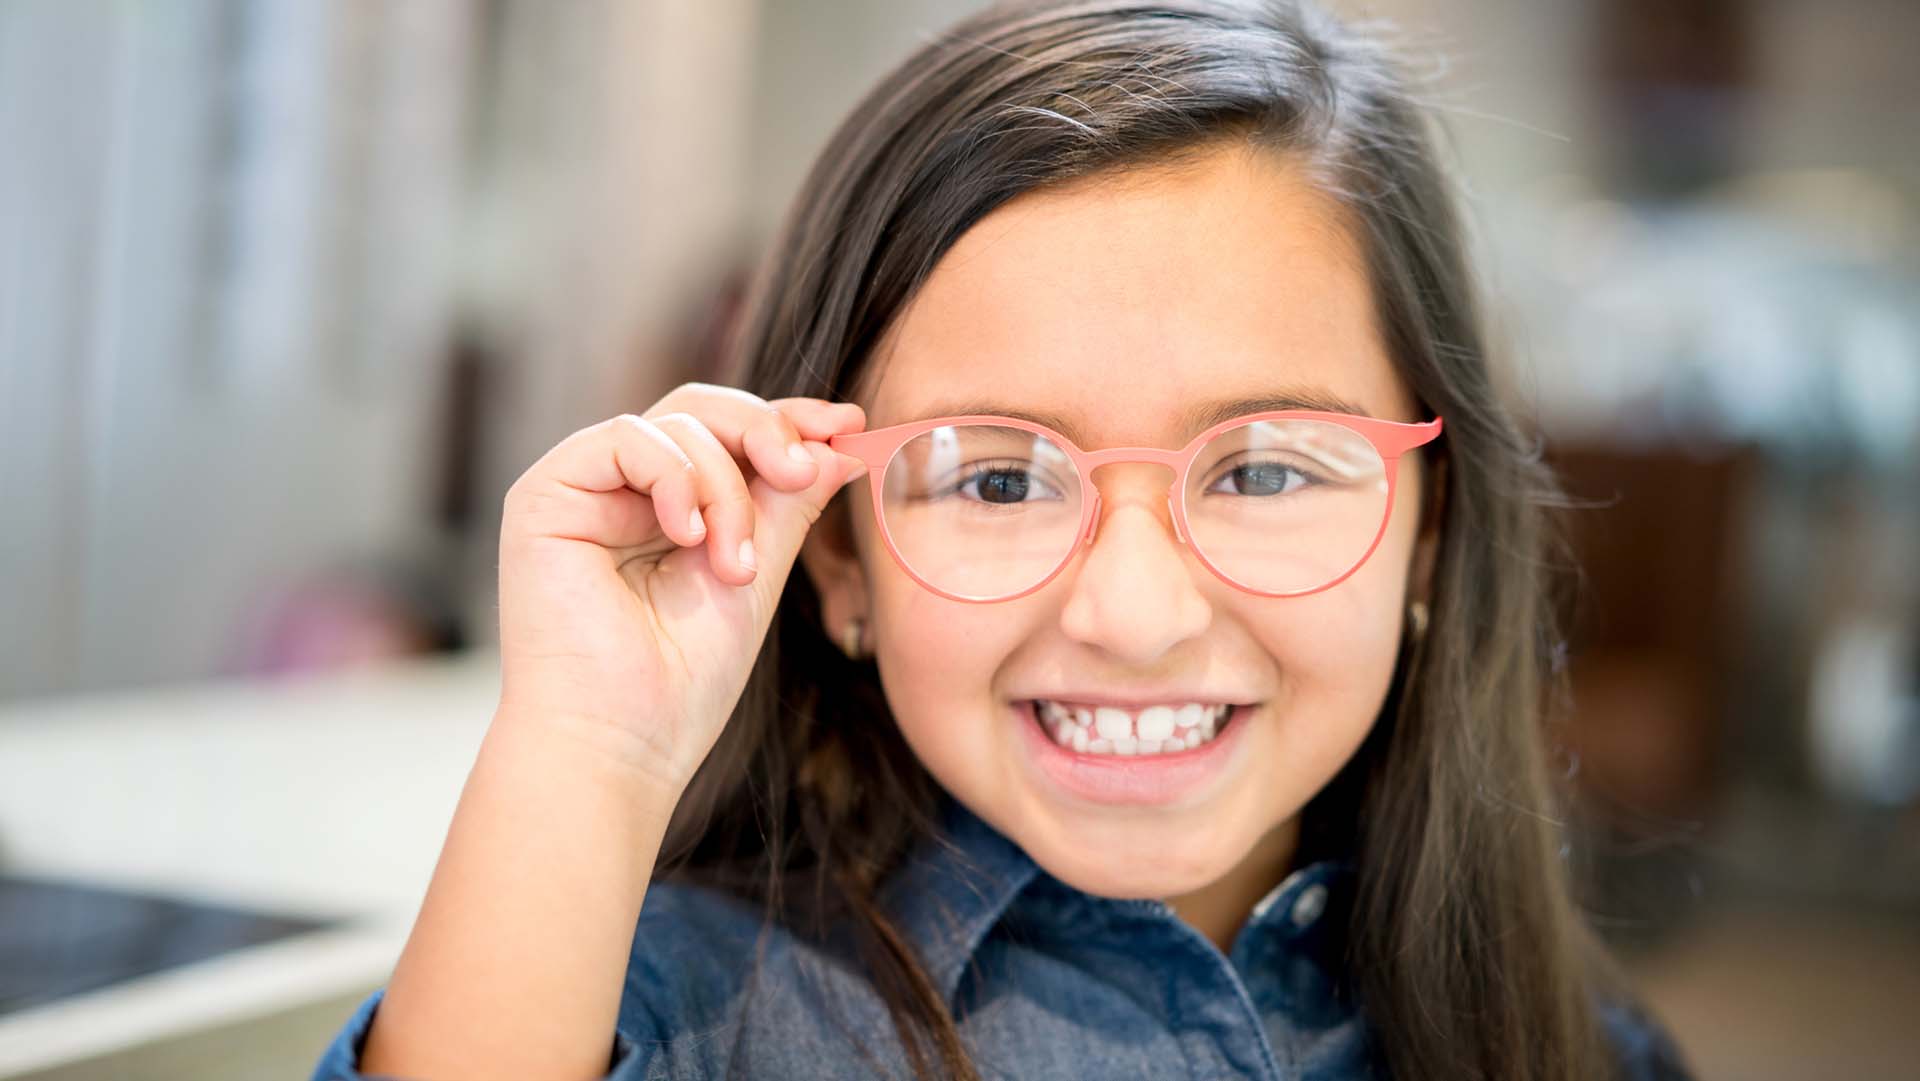 Little girl trying glasses at the optician - healthcare and medicine concepts